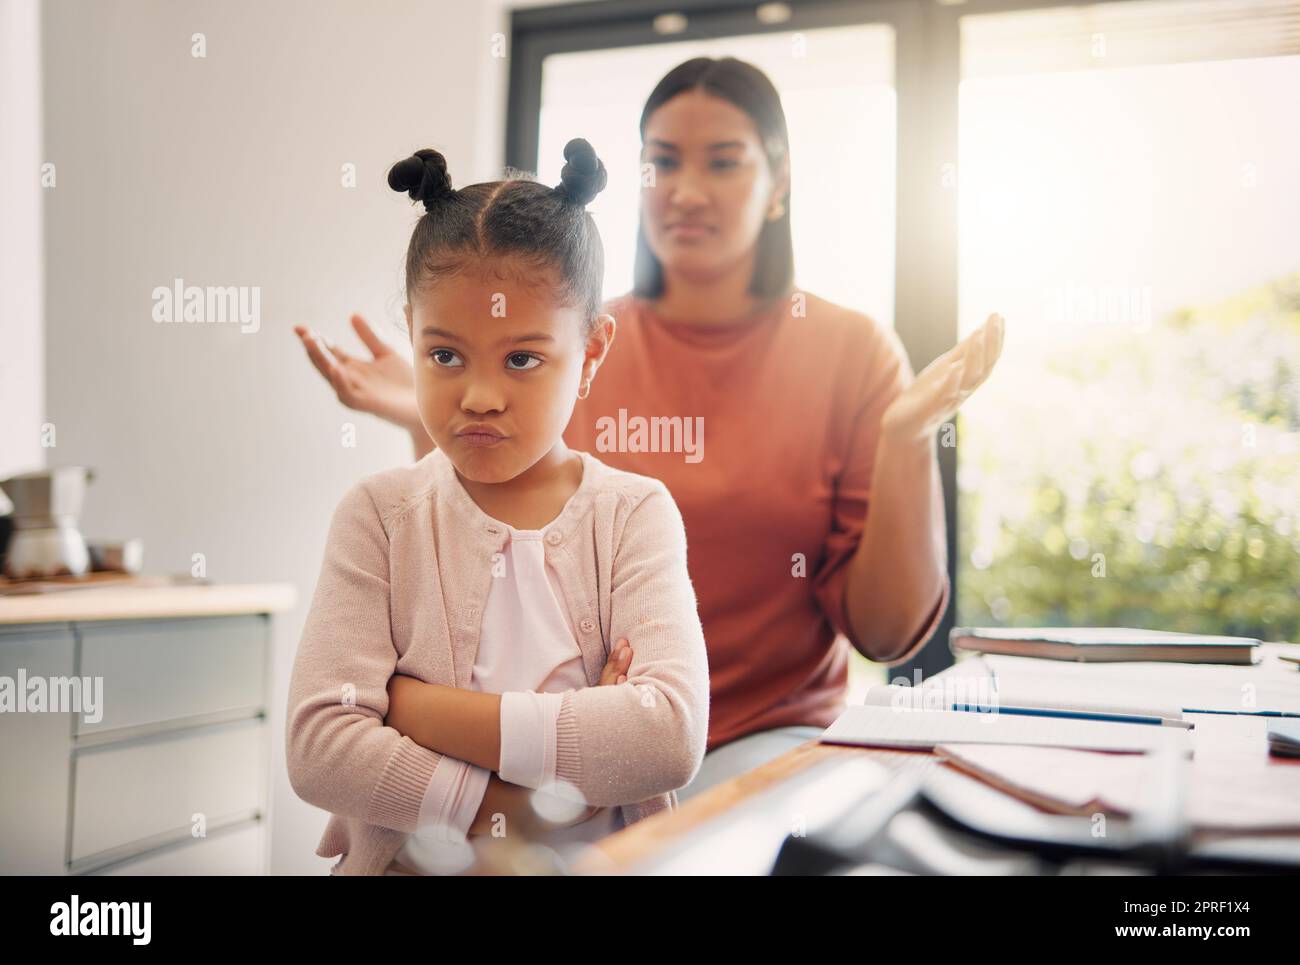 Upset, discipline and family while offended and stubborn little girl looking unhappy with her scolding mother in the background. Naughty, problem and bad child angry and ignoring her parent at home Stock Photo